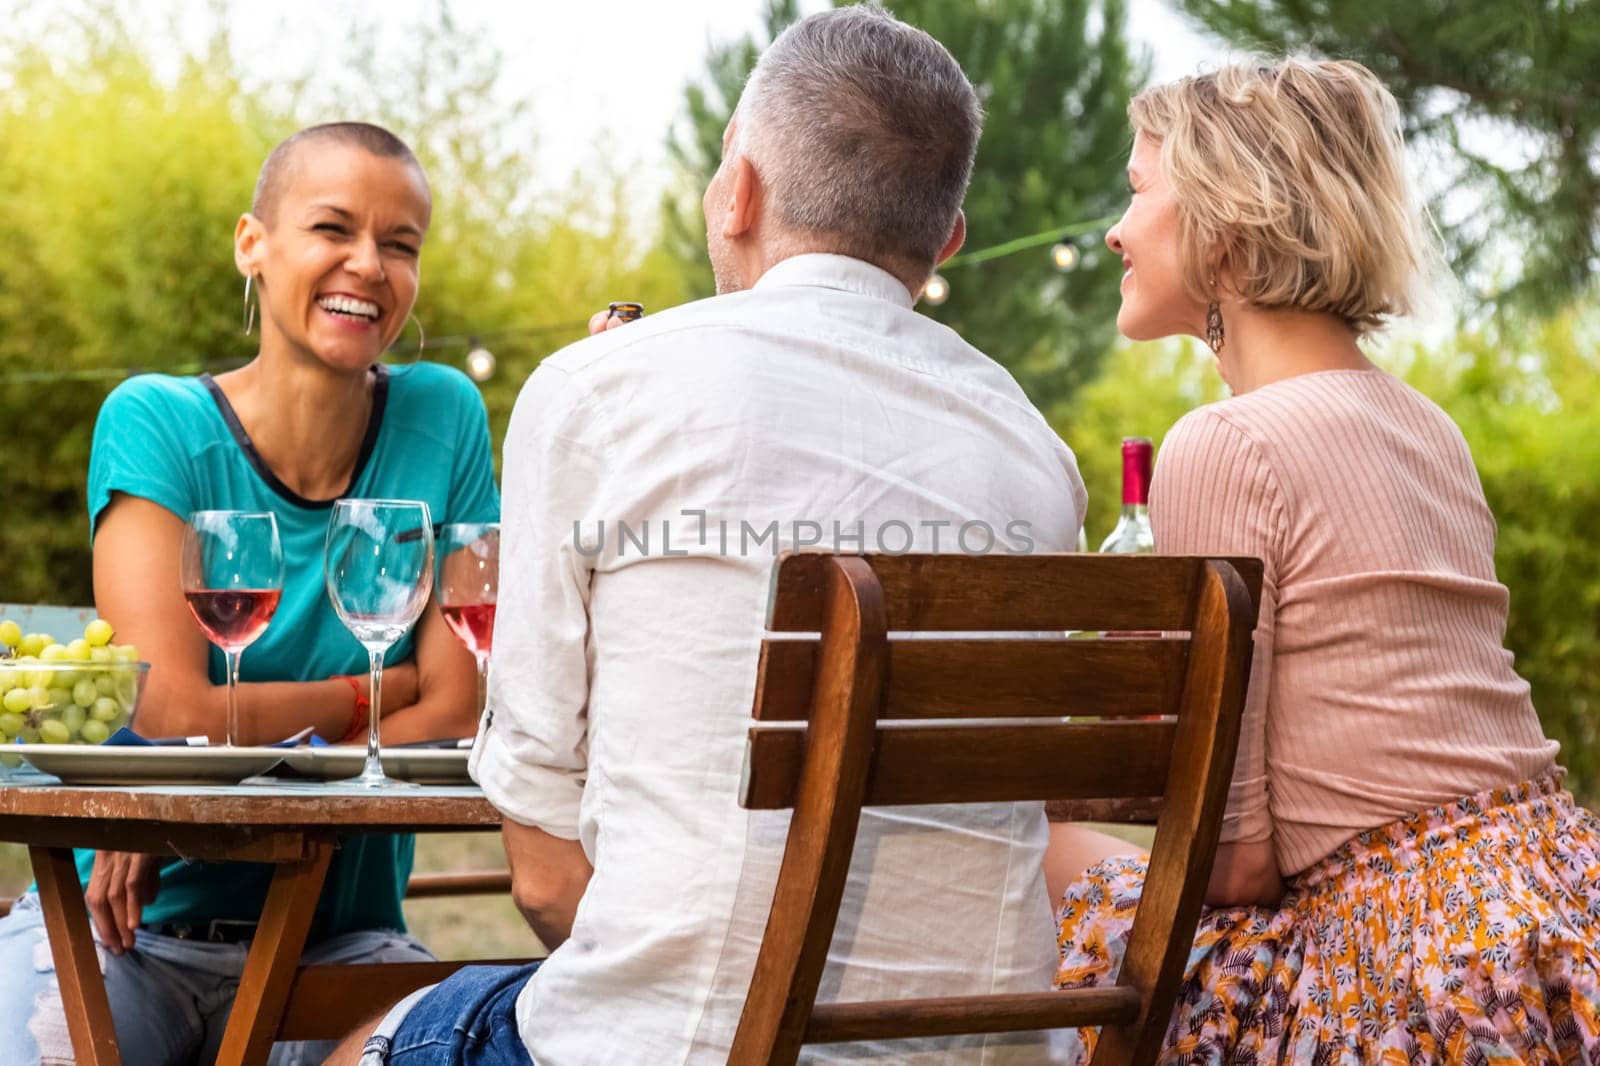 Happy and smiling woman talking to friends during garden dinner party. by Hoverstock